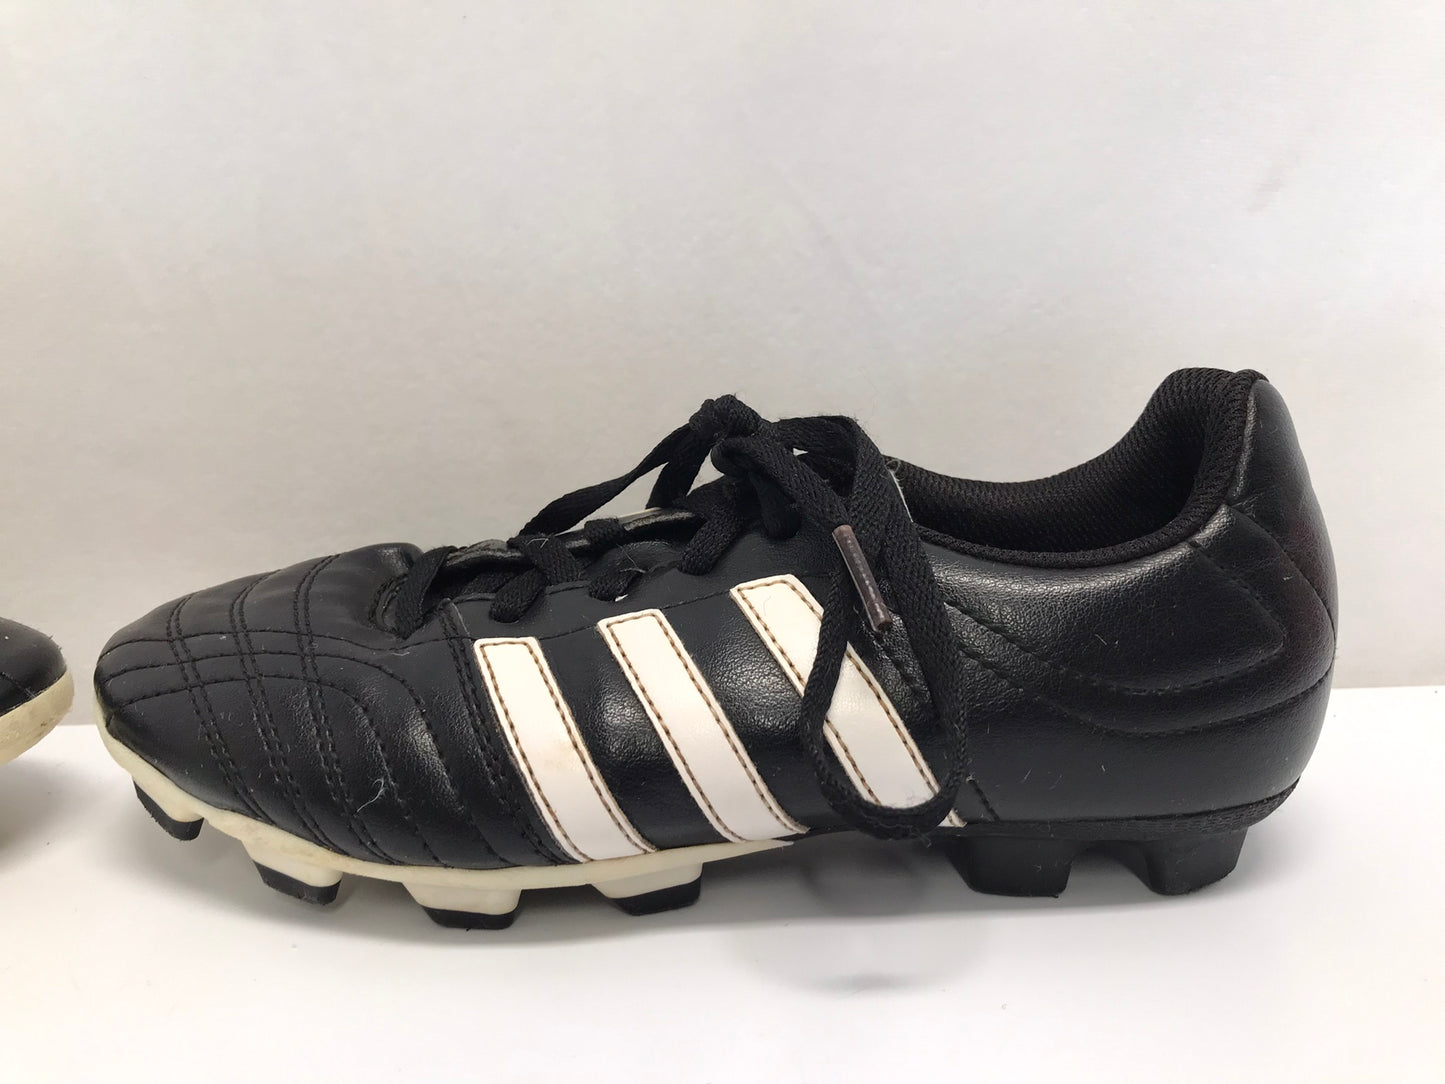 Soccer Shoes Cleats Child Size 3 Adidas Black White